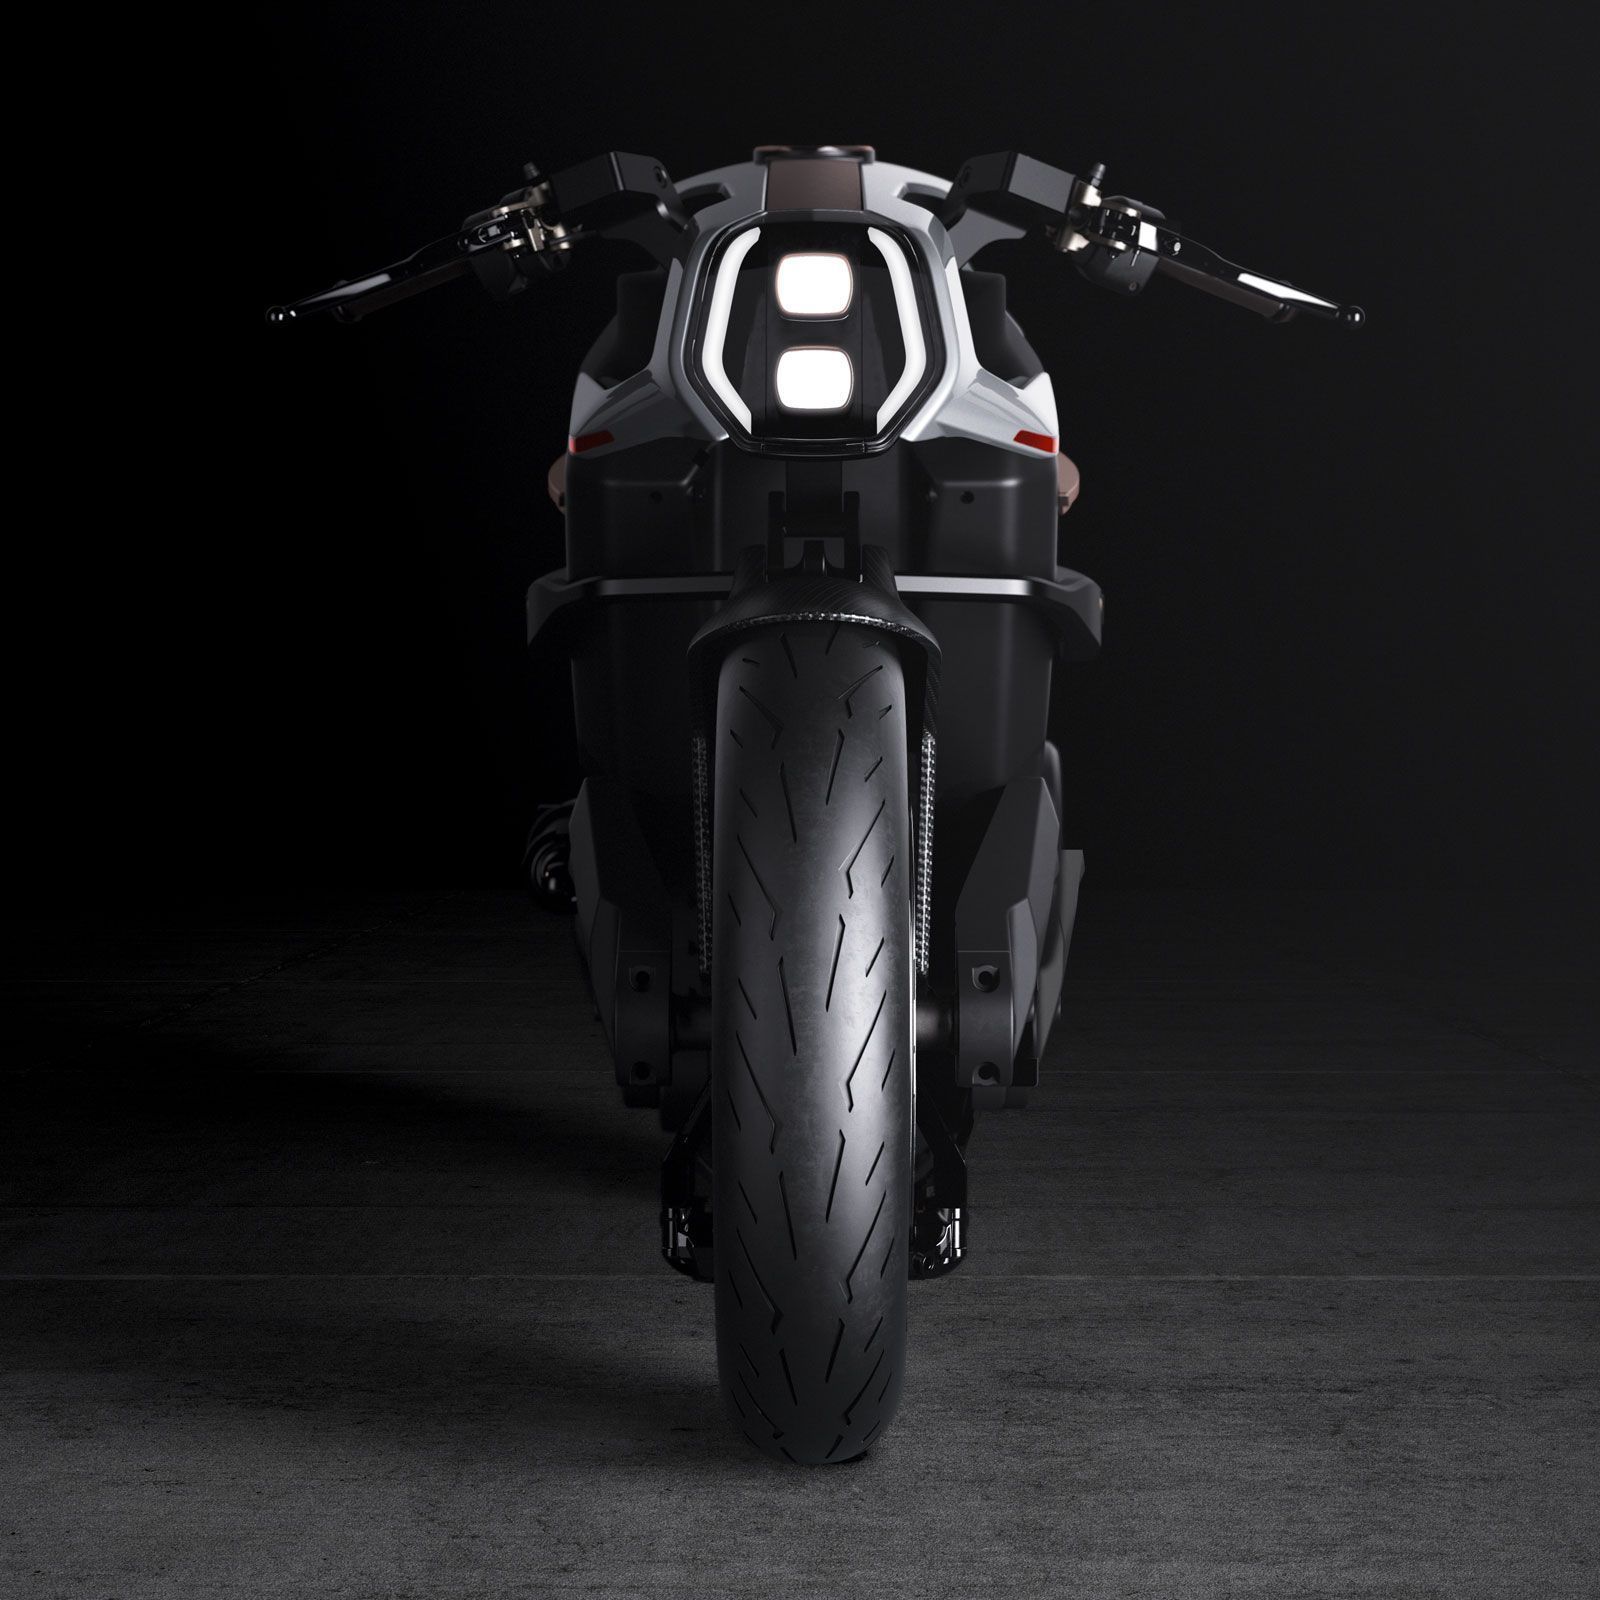 The Arc Vector electric motorcycle